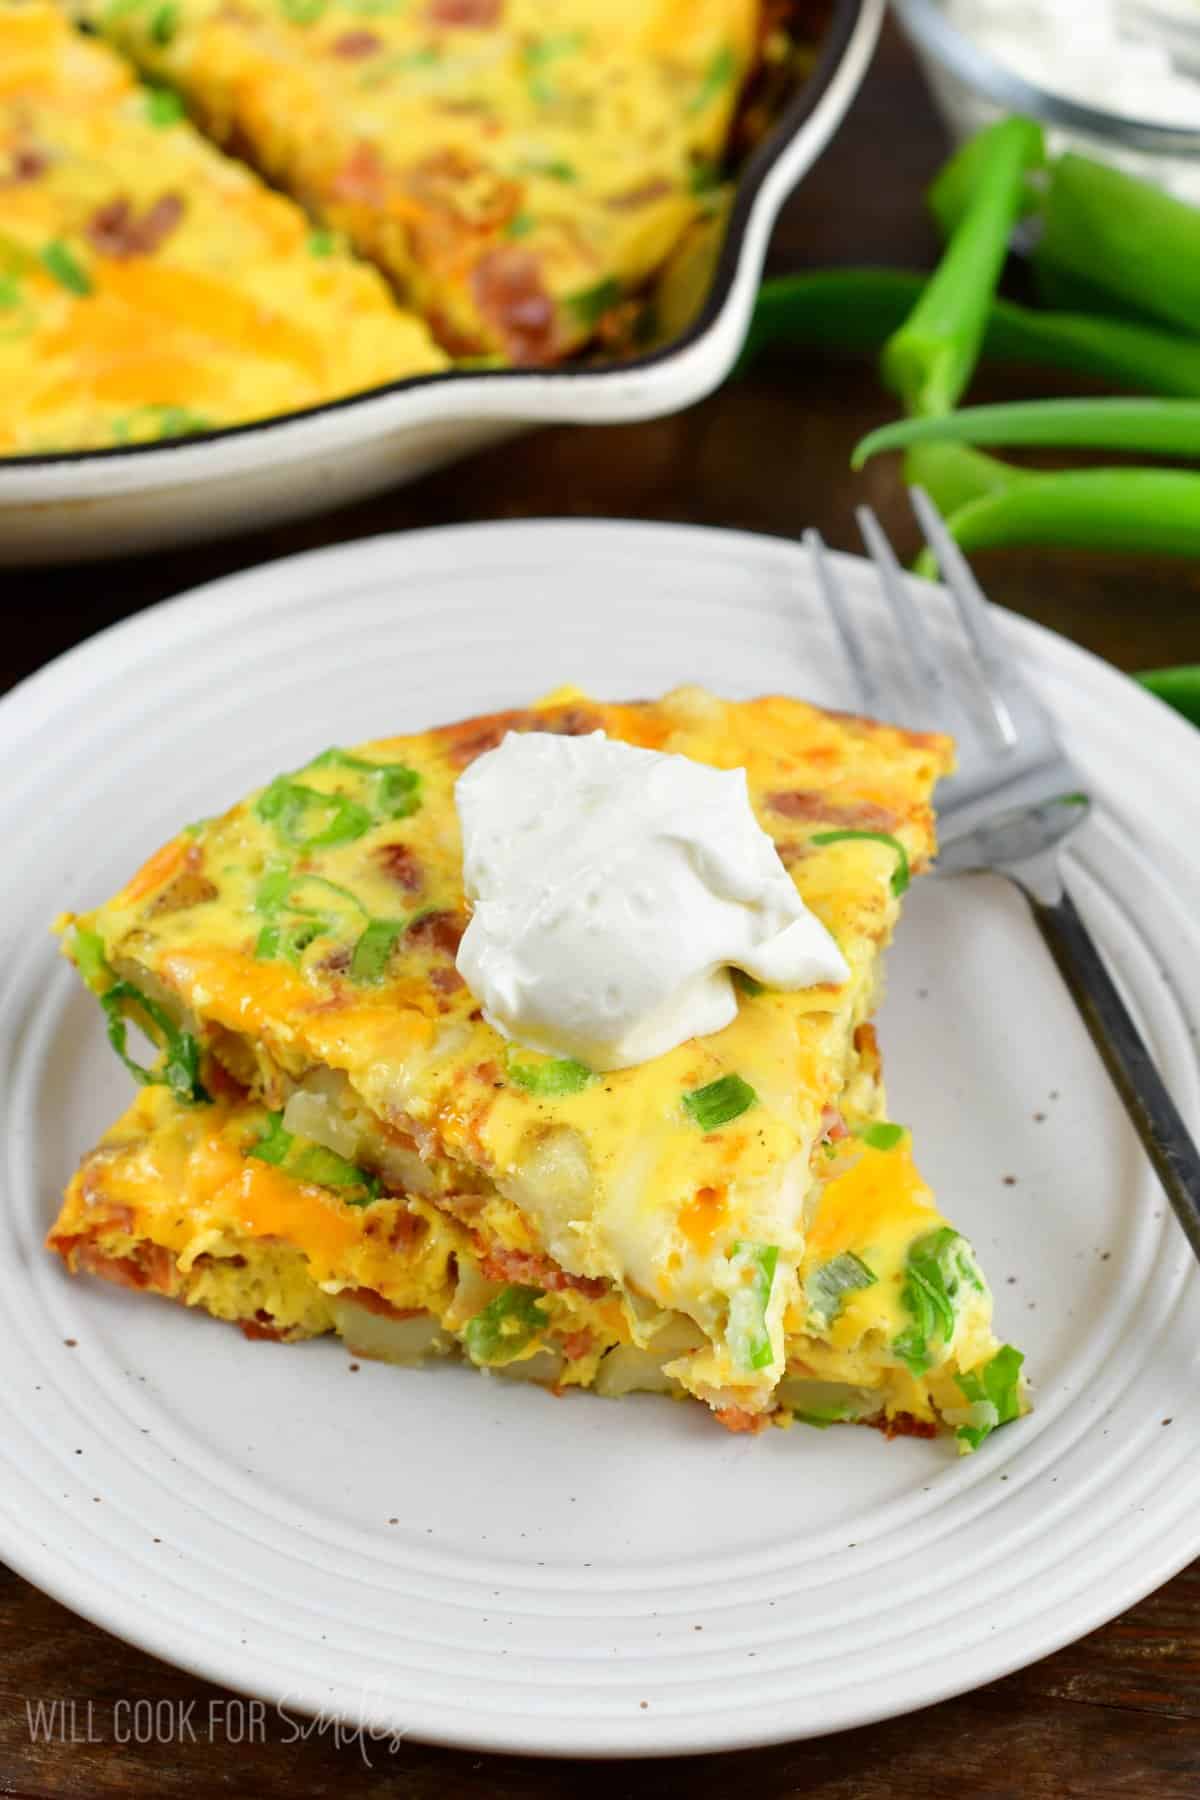 two breakfast bake triangles stacked on the plate with some sour cream on top.